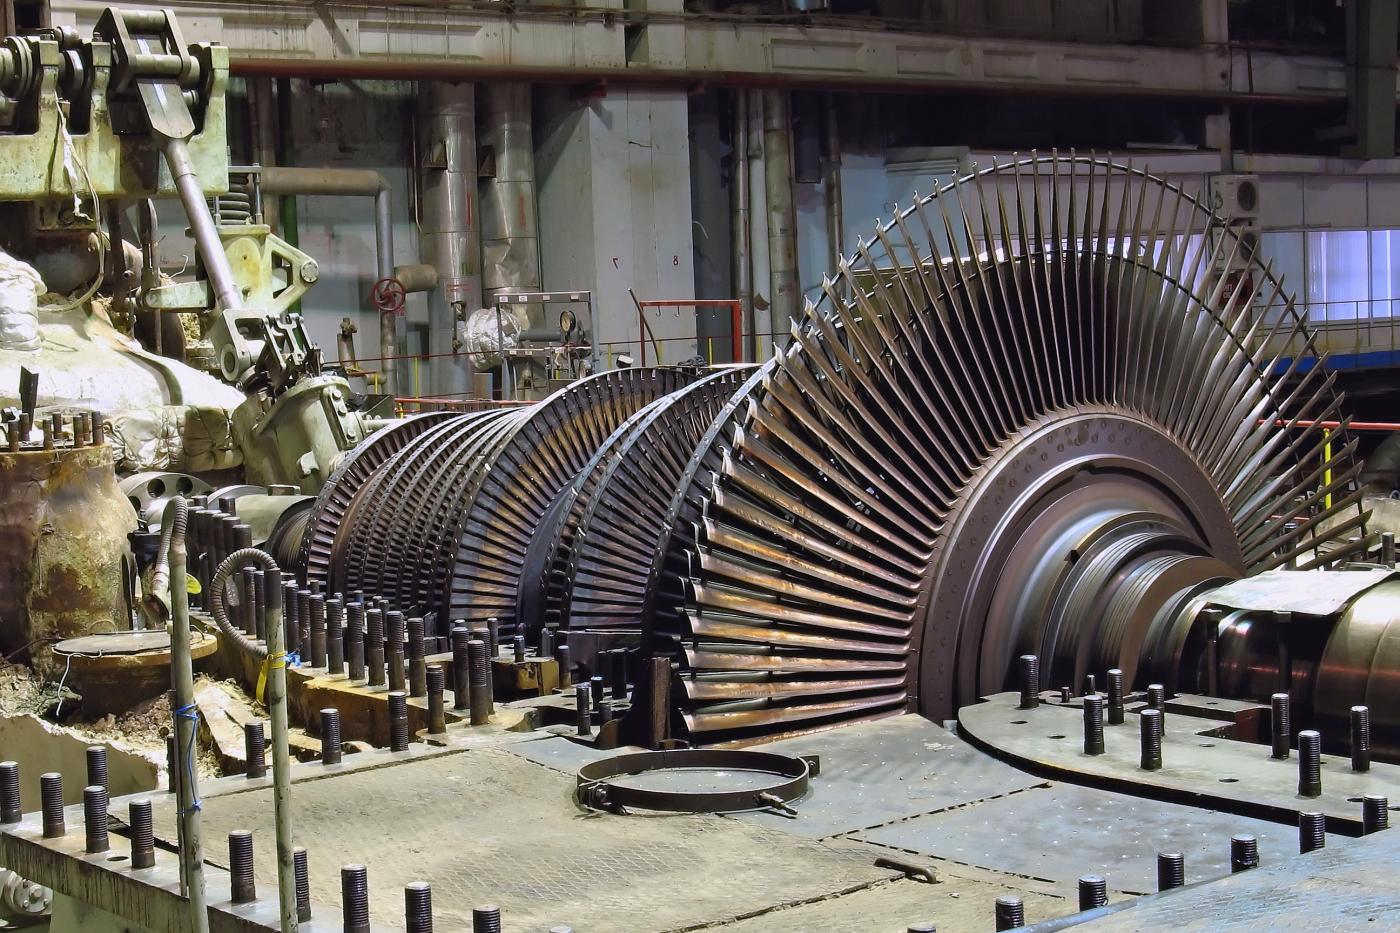 Steam turbine facility with multiple energy-producing turbines from very large size to smaller sized assemblies.